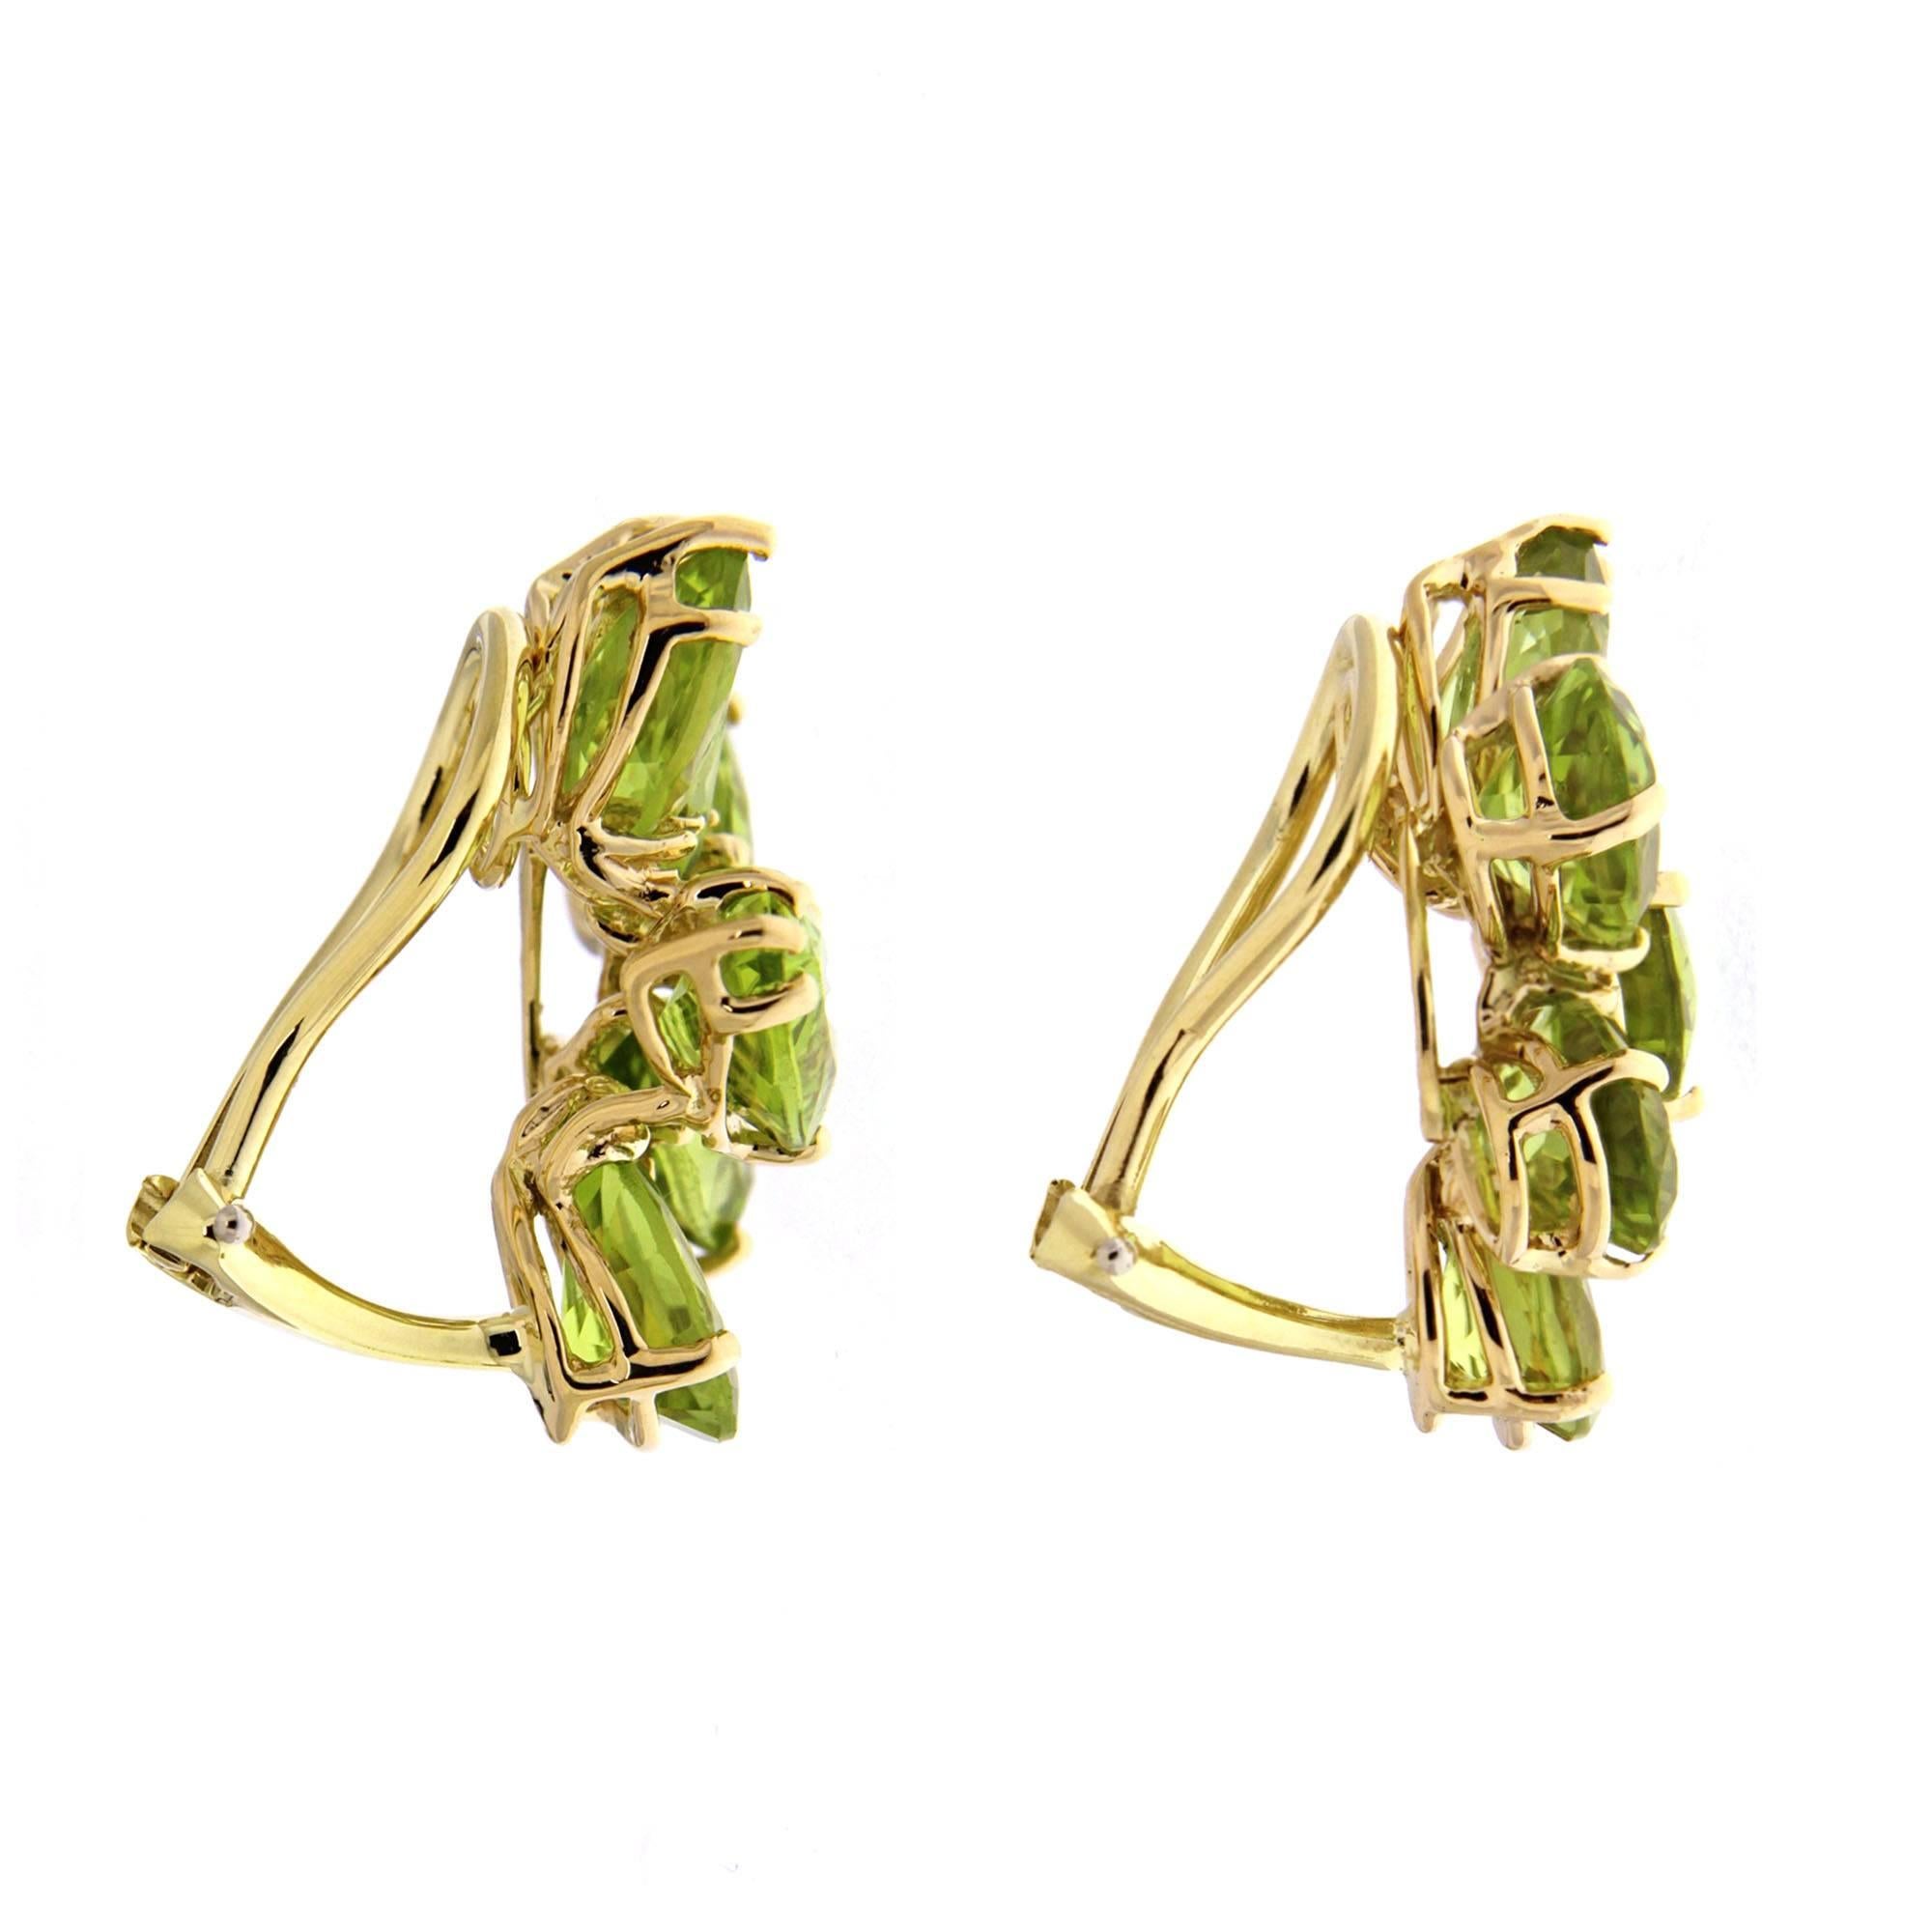 One of the most unique jewelry designs, this lovely pair of earrings features cluster of pear shape and marquise cut peridots selected and matched perfectly by our gem expert . The earrings are finished in 18kt yellow gold with clip backs. The